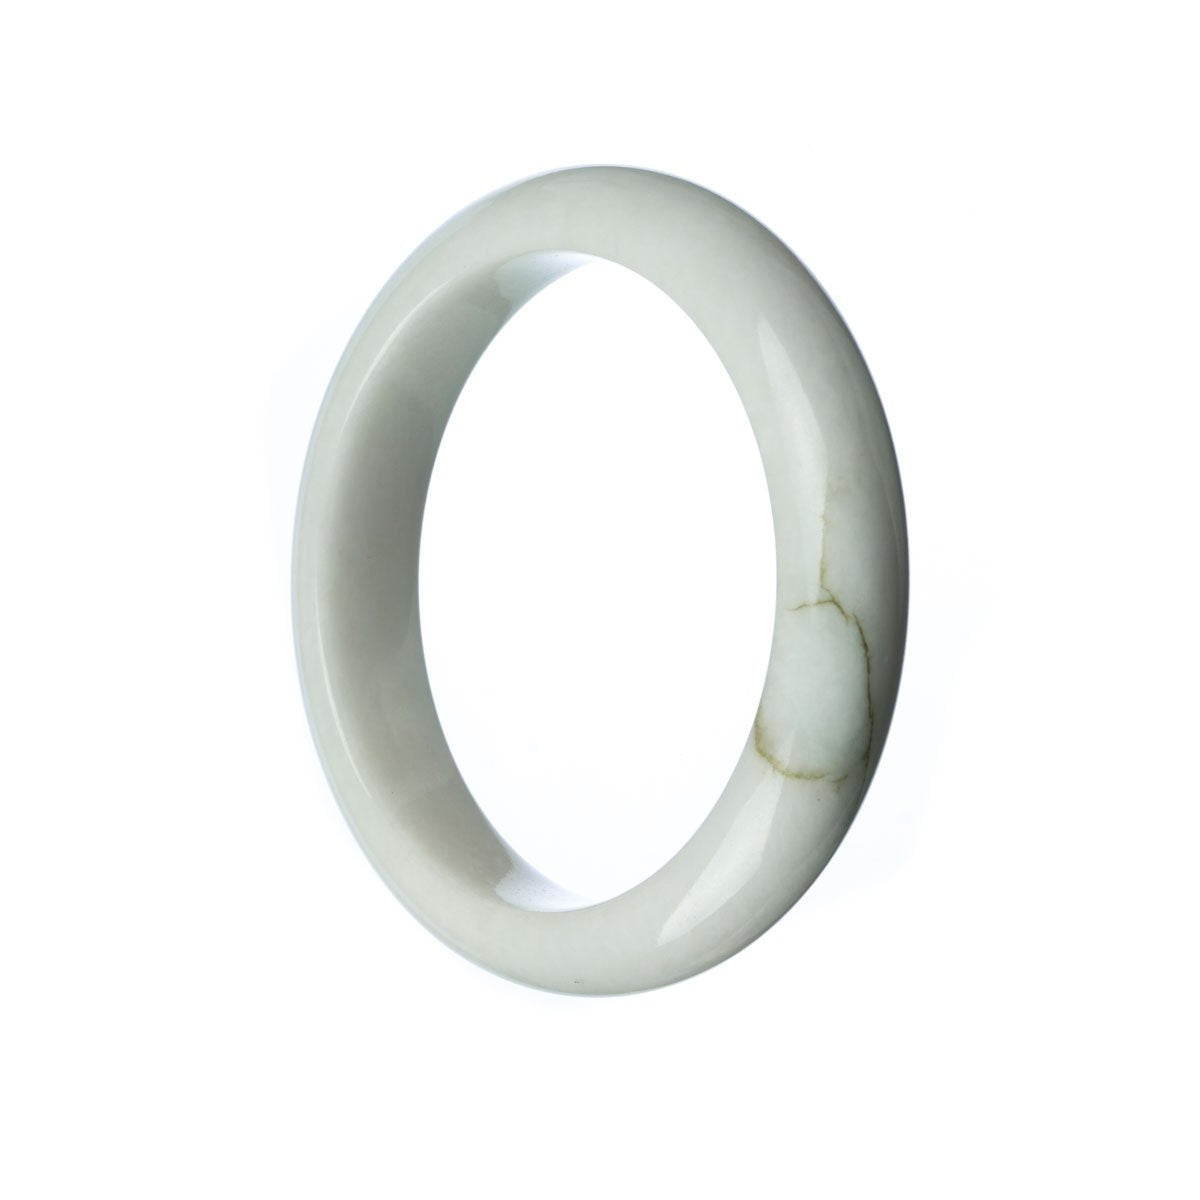 A beautiful white jade bangle bracelet with a half-moon design, measuring 58mm. Made from genuine untreated white jade.